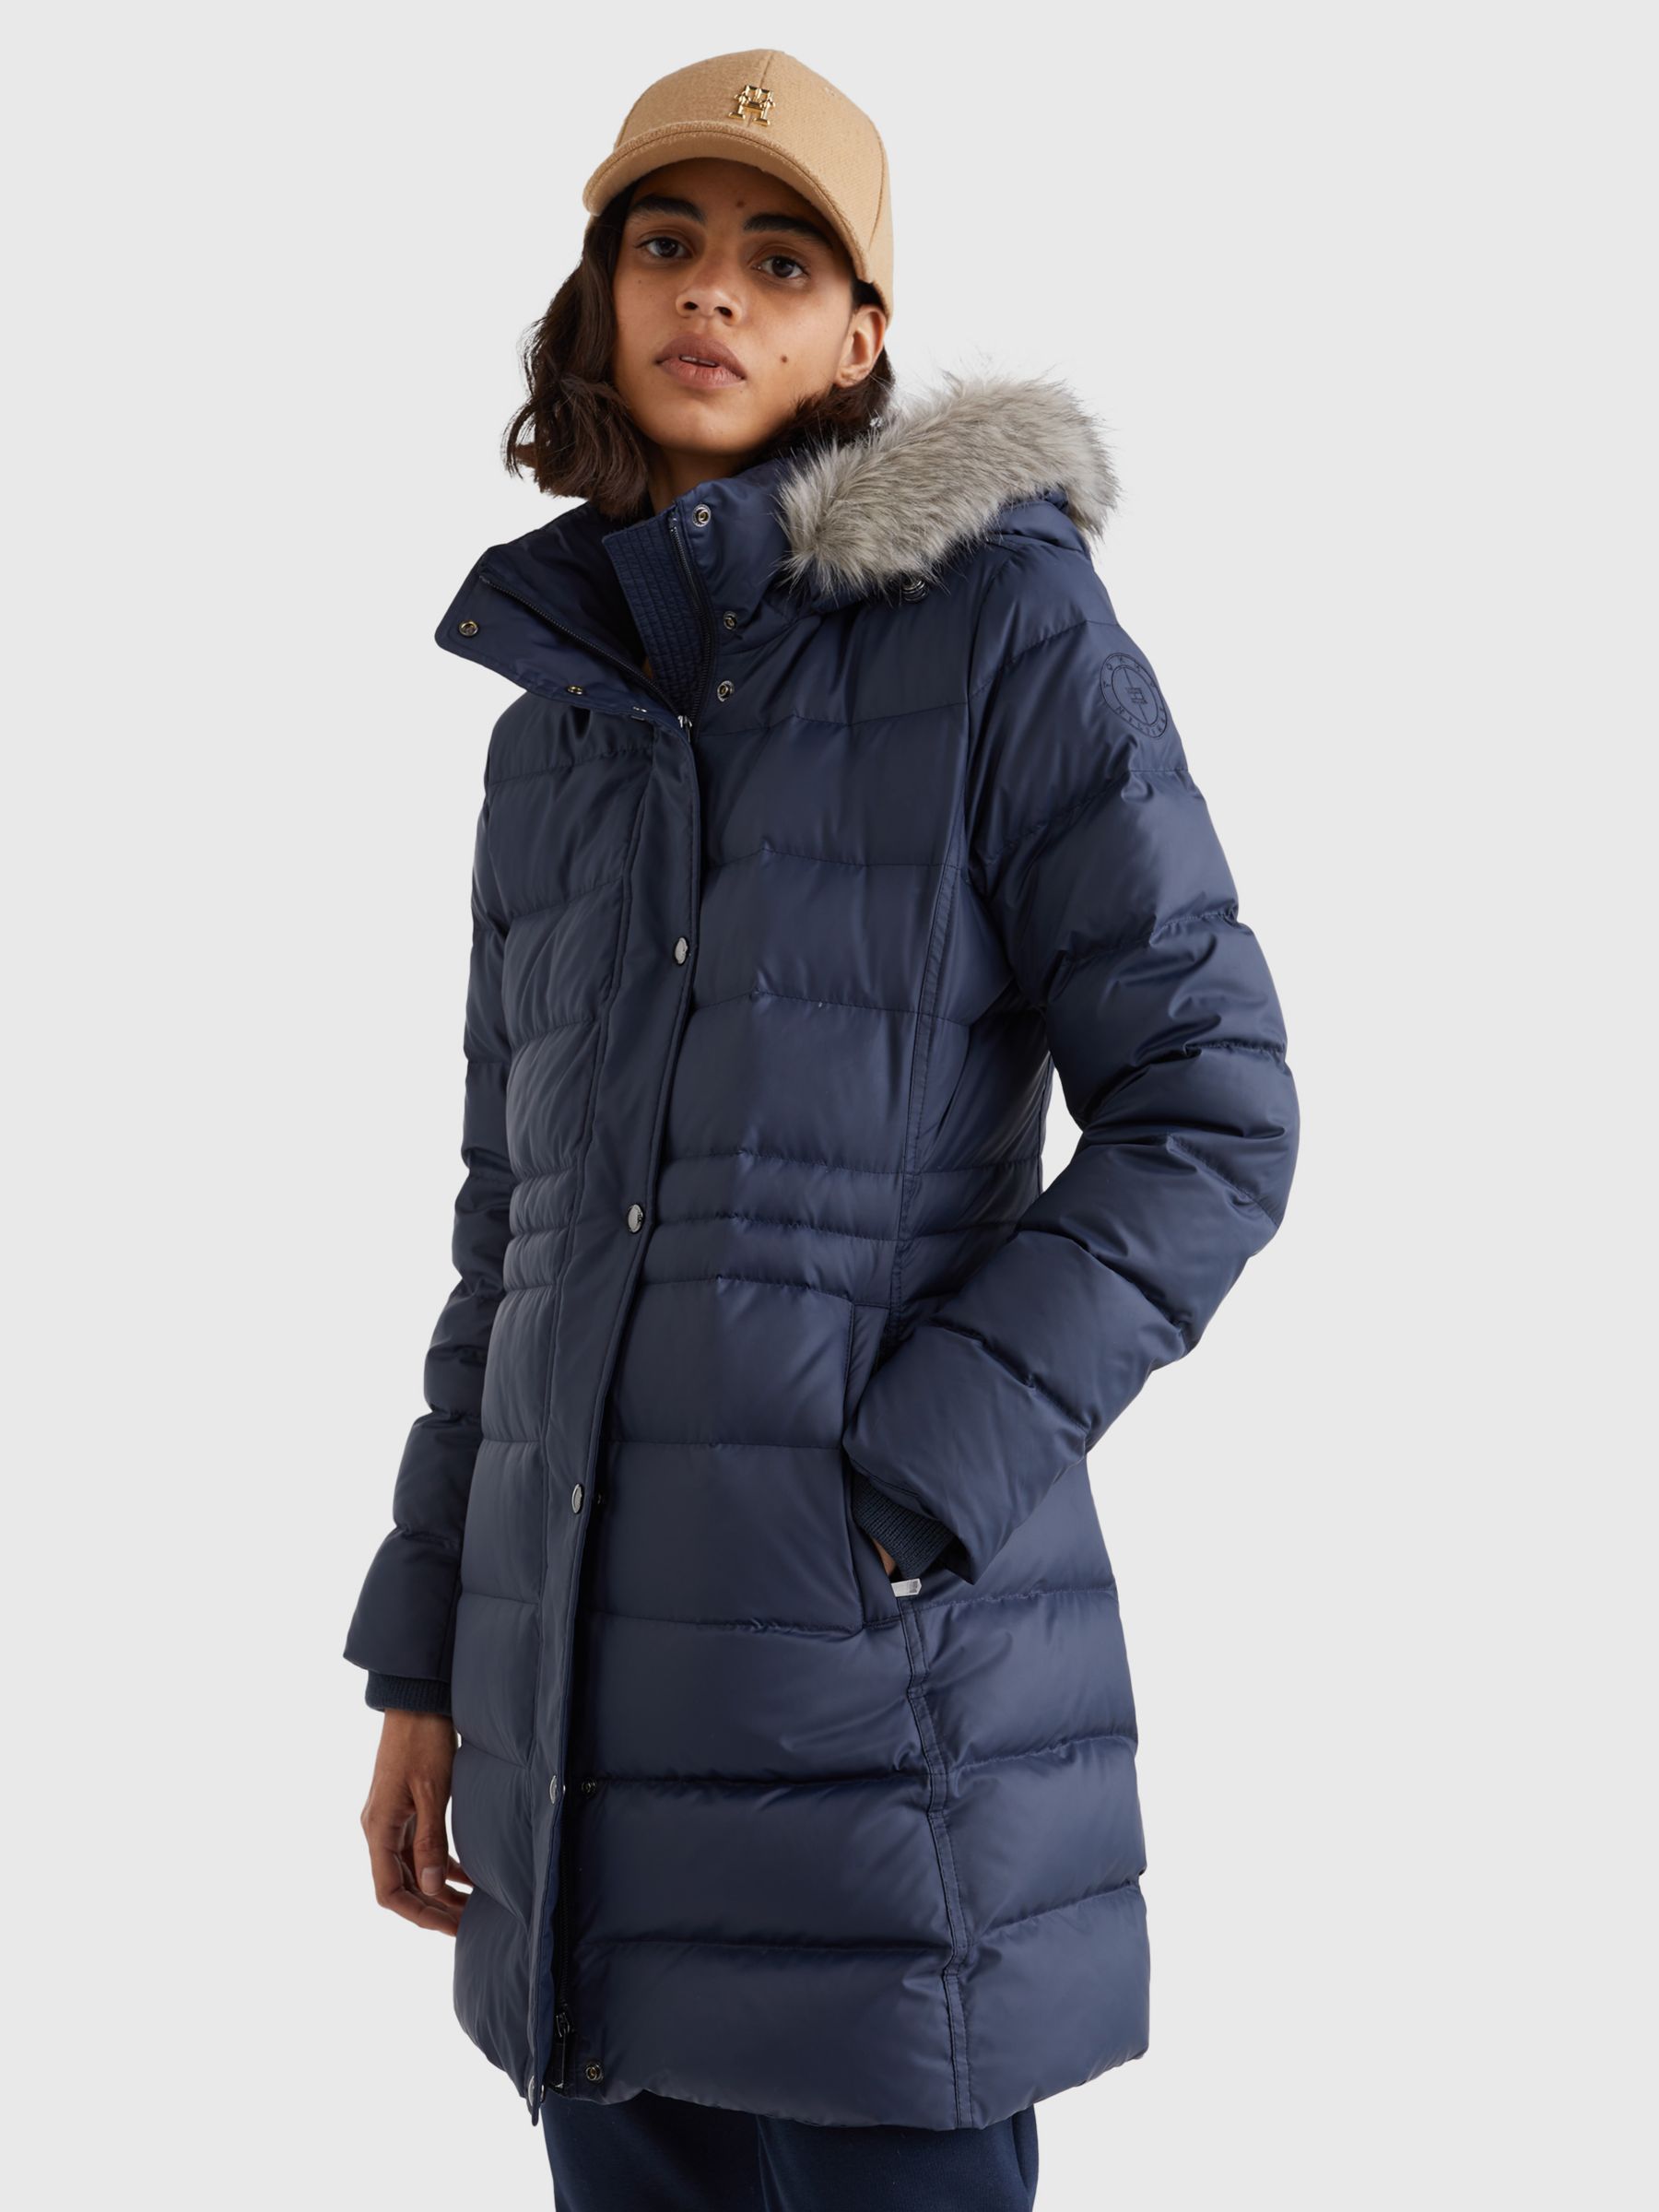 Tommy Hilfiger Tyra Down Padded Coat, Desert Sky at John Lewis & Partners